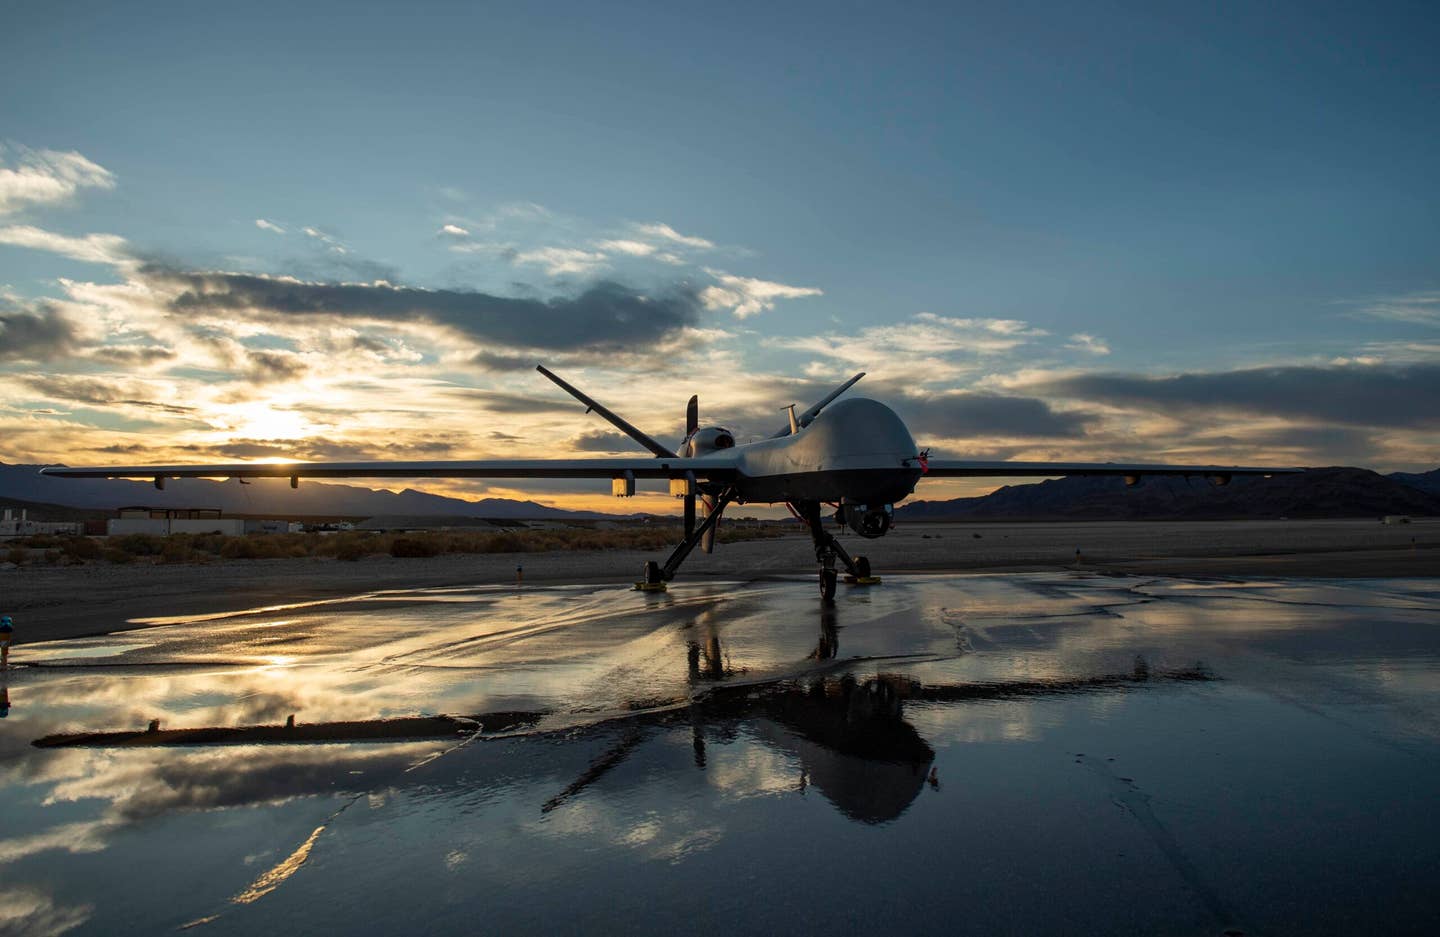 An MQ-9 Reaper sits on the runway during sunset at Creech Air Force Base, Nev., Nov. 17, 2020. <em>U.S. Air Force photo by Staff Sgt. Lauren Silverthorne</em>